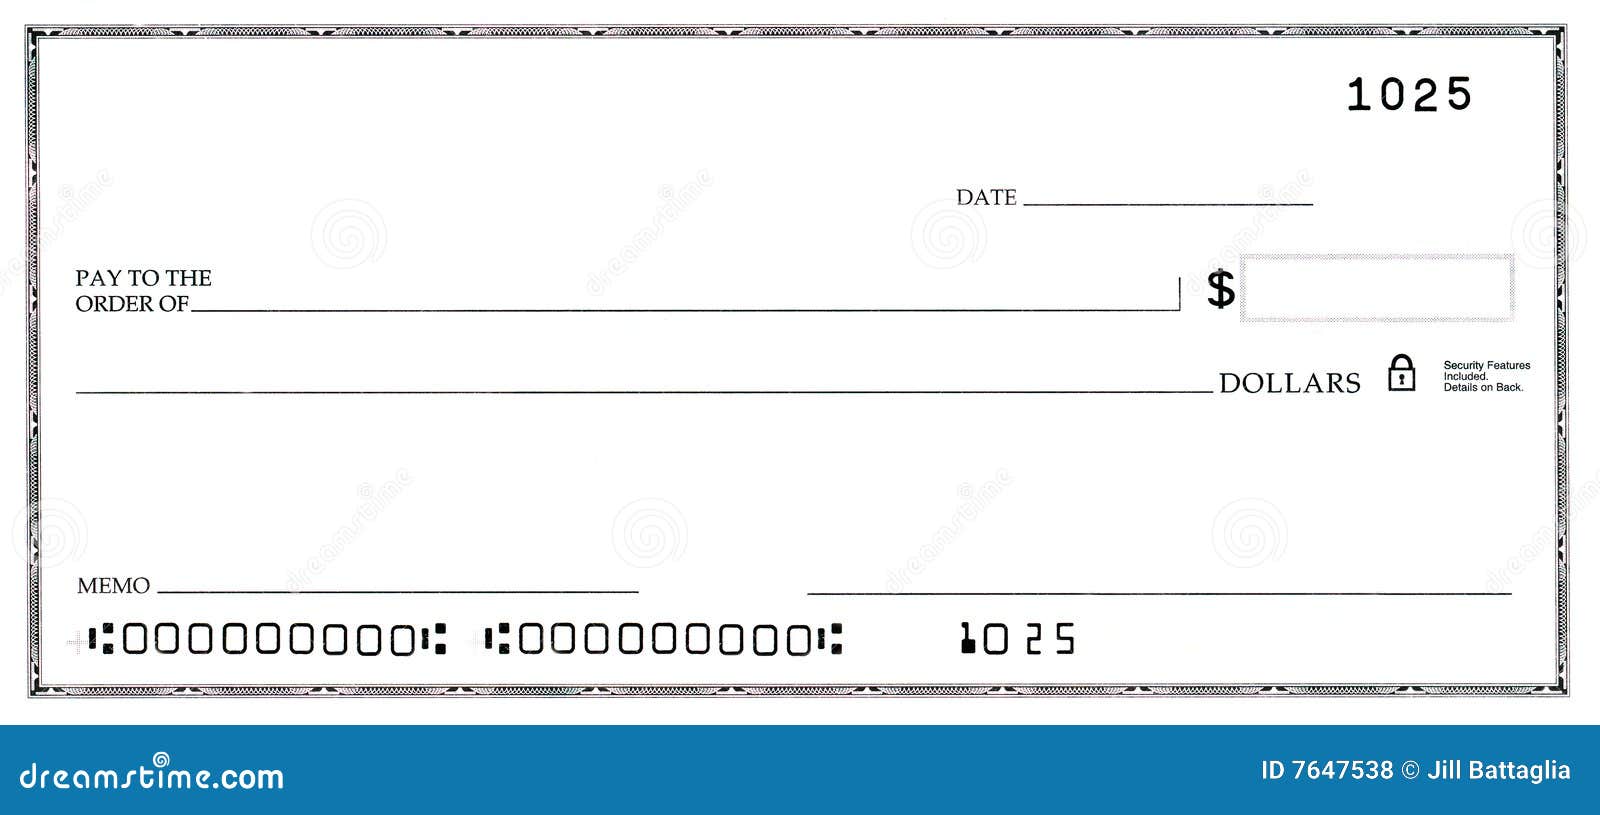 13 972 Blank Check Photos Free Royalty Free Stock Photos From Dreamstime